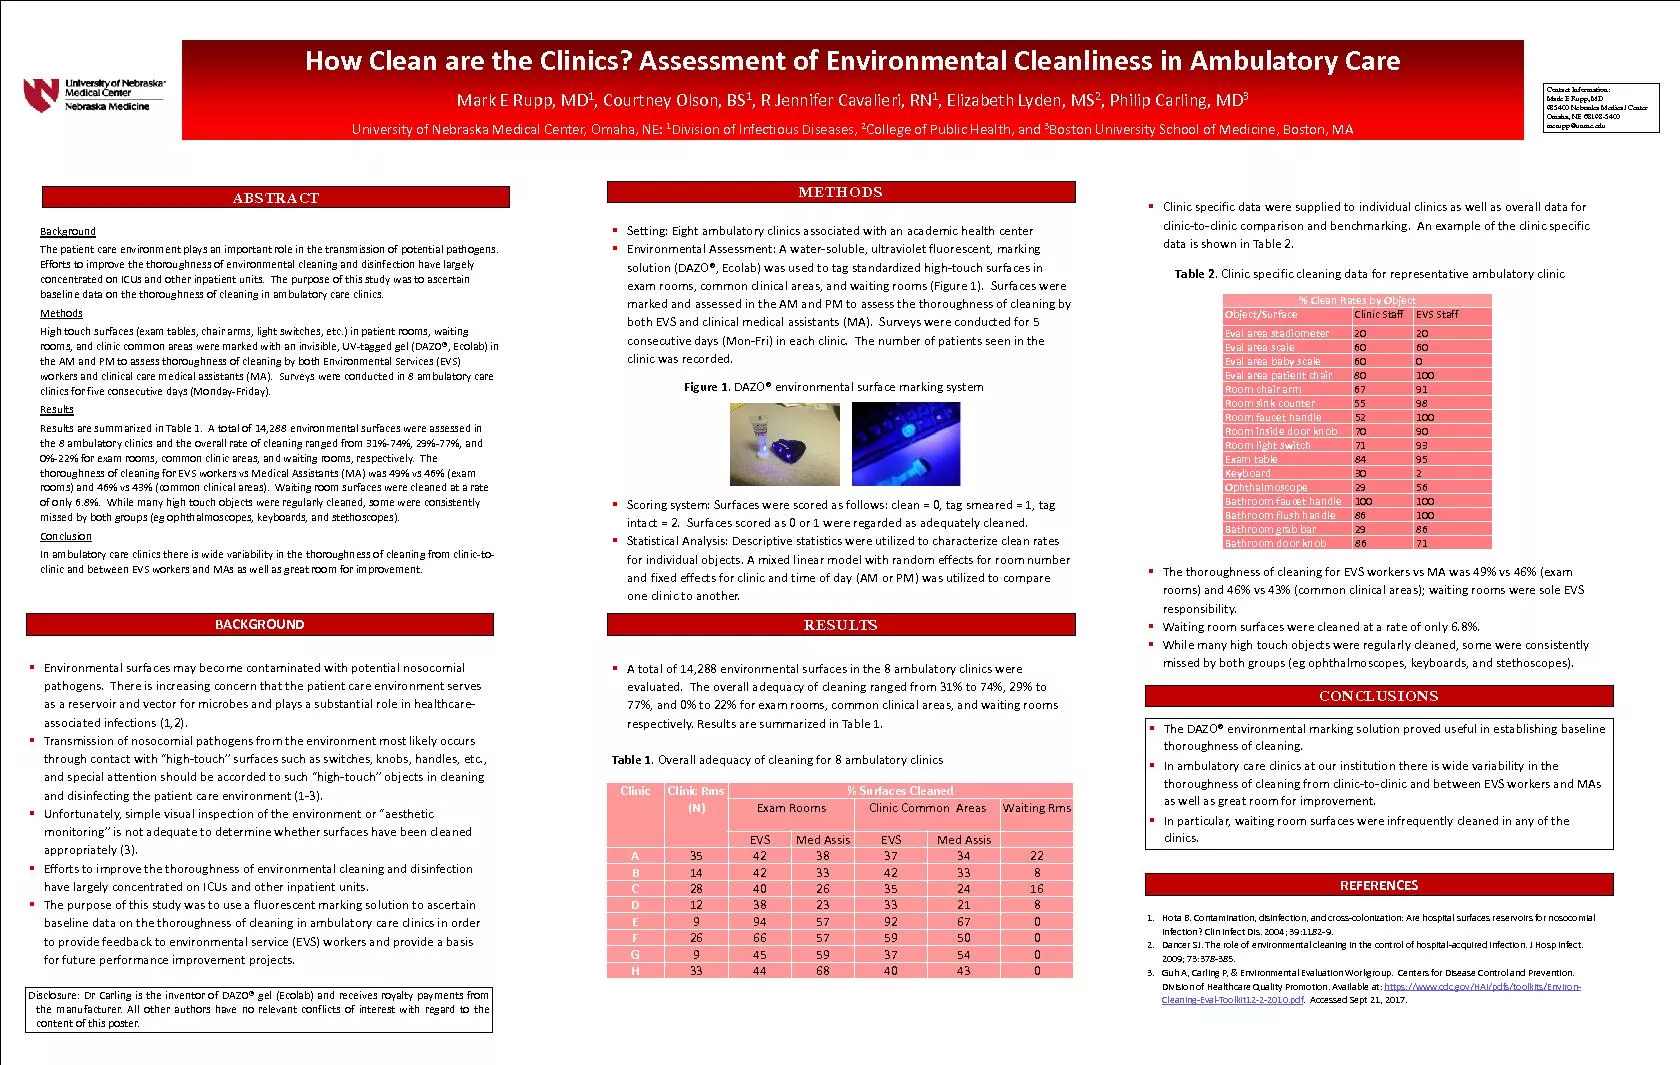 How Clean are the Clinics? Assessment of Environmental Cleanliness in